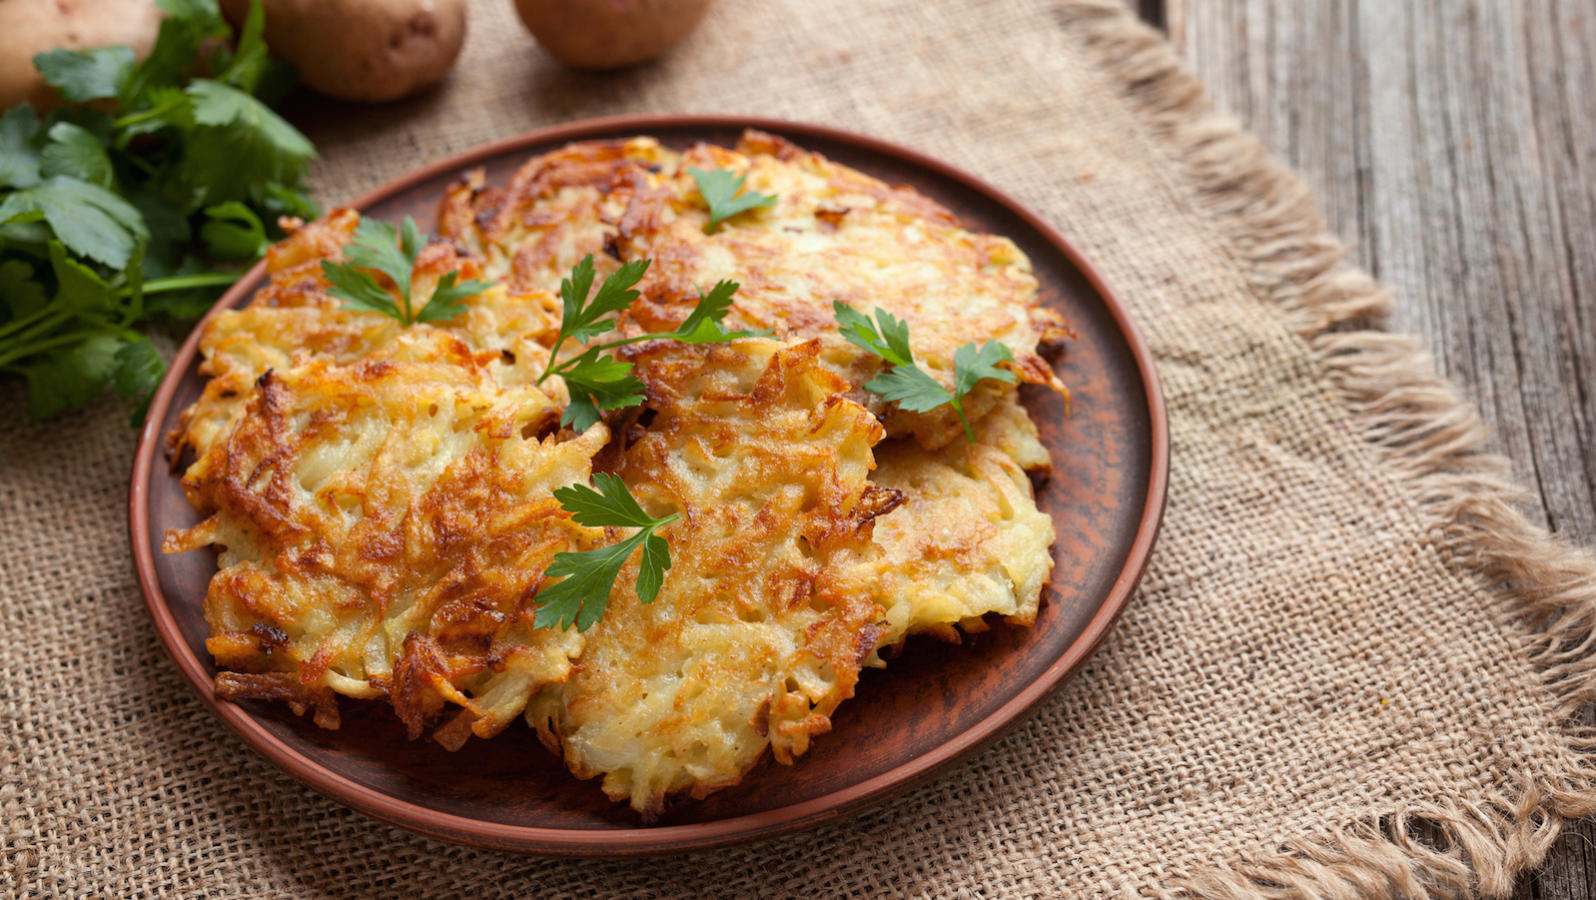 I’ll Reveal What 🐙 Misunderstood Animal Your Soul Aligns With Simply Based on This “Would You Rather” Food Test Potato pancakes or latke